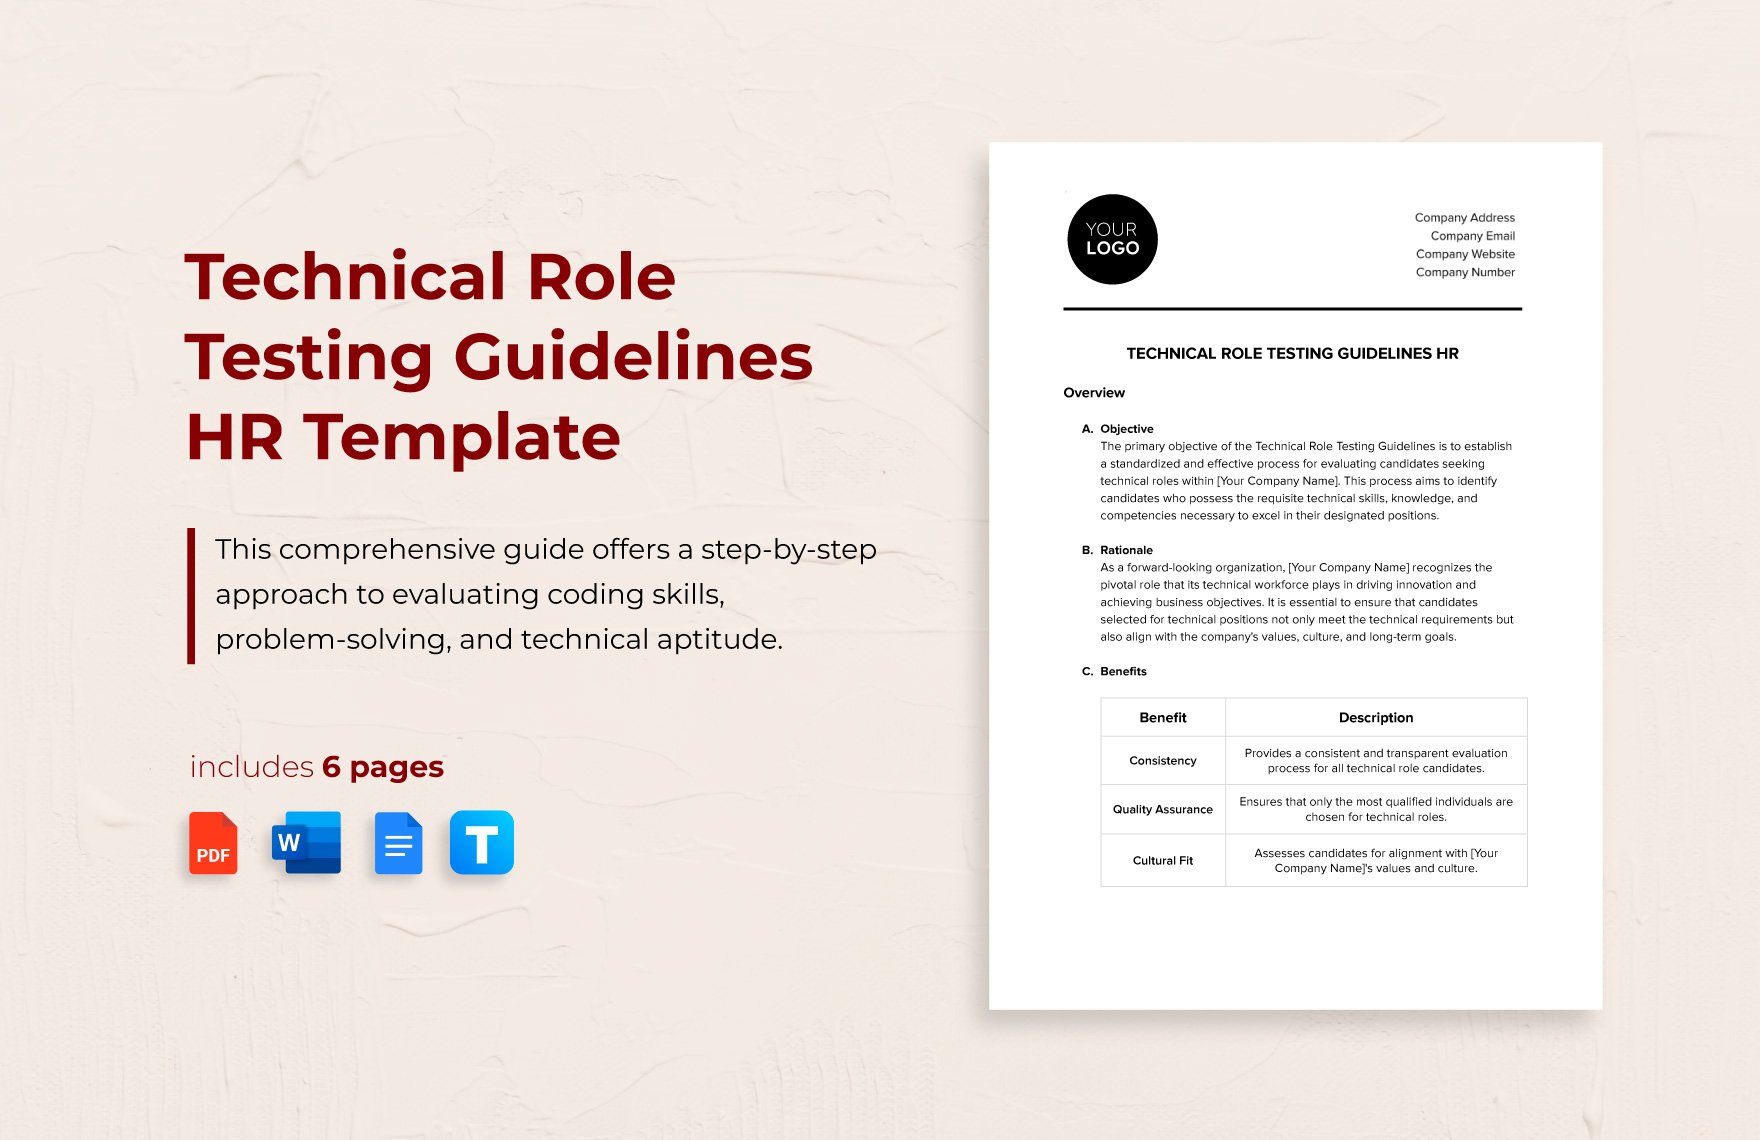 Technical Role Testing Guidelines HR Template